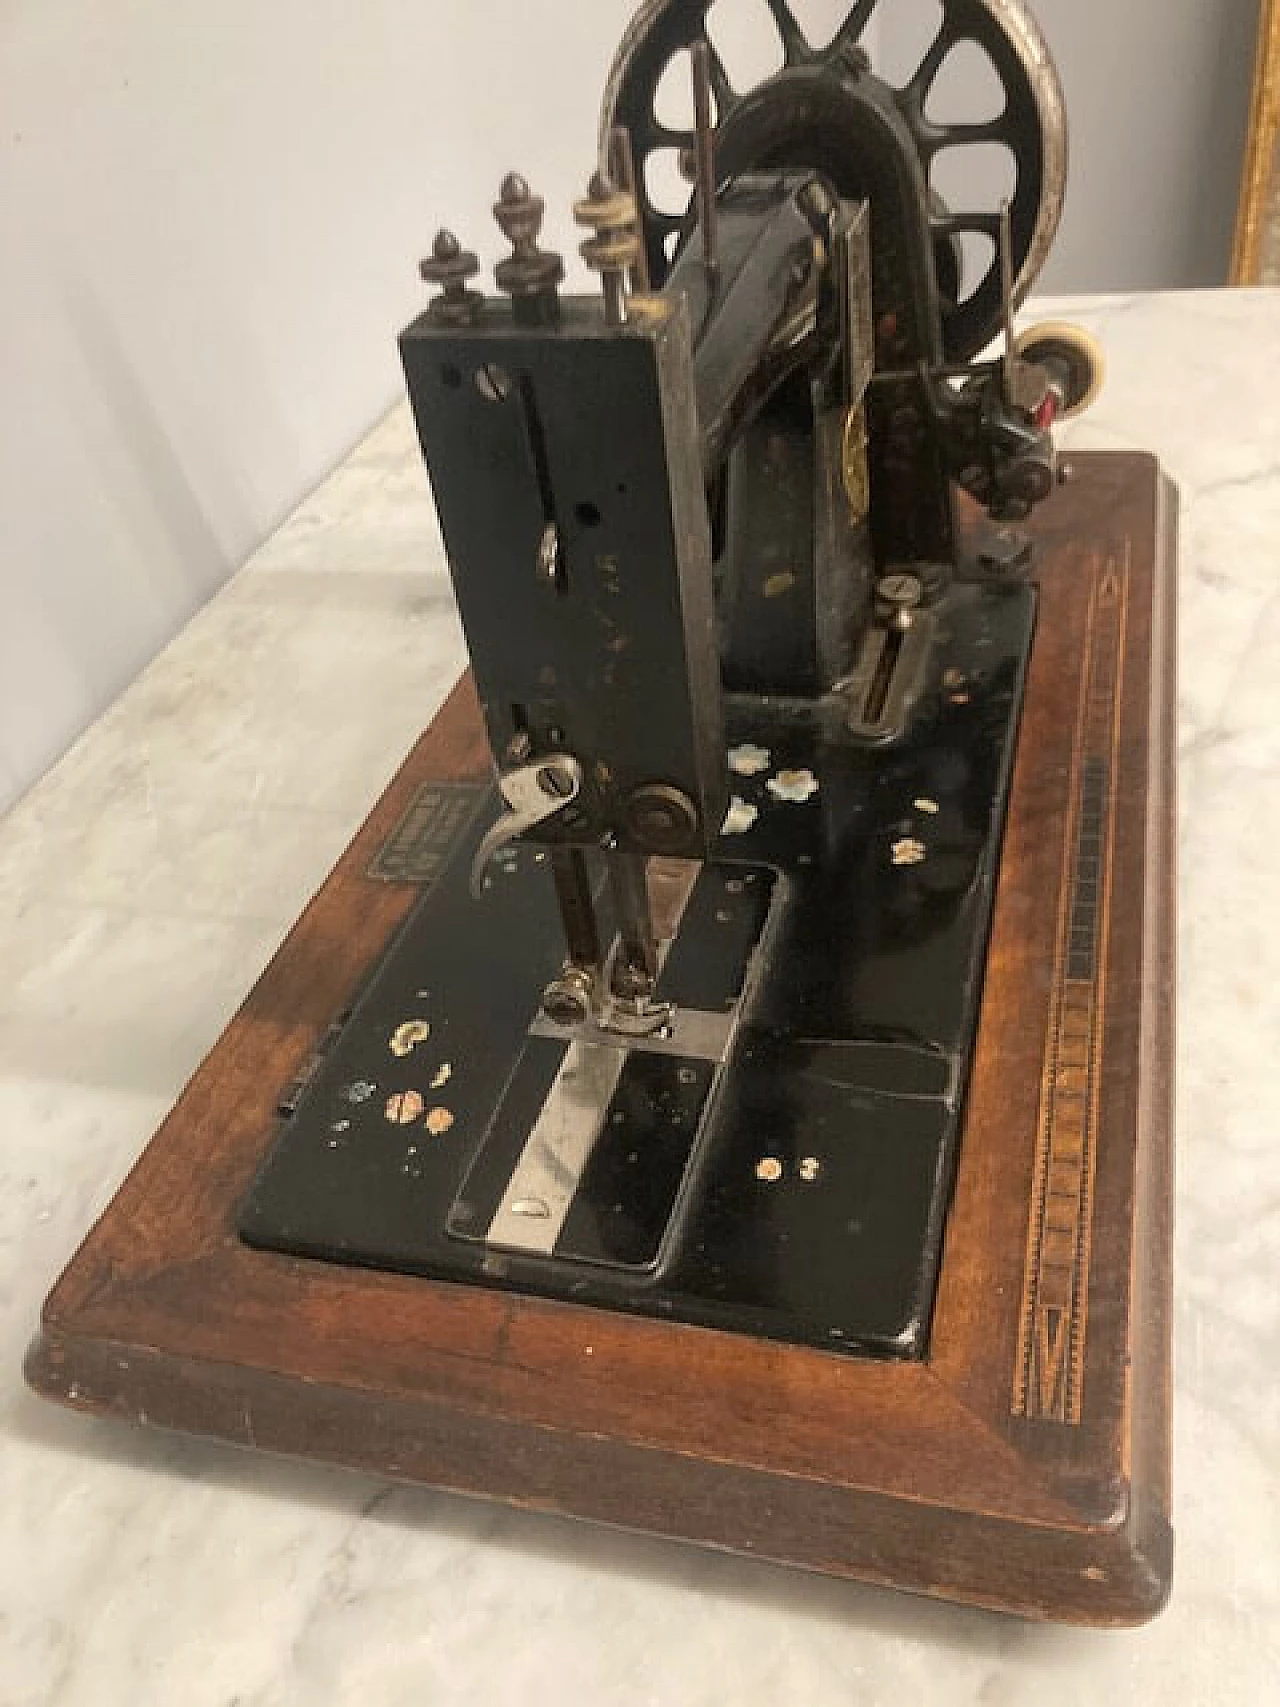 Tabletop sewing machine with mother-of-pearl inlays, late 19th century 10